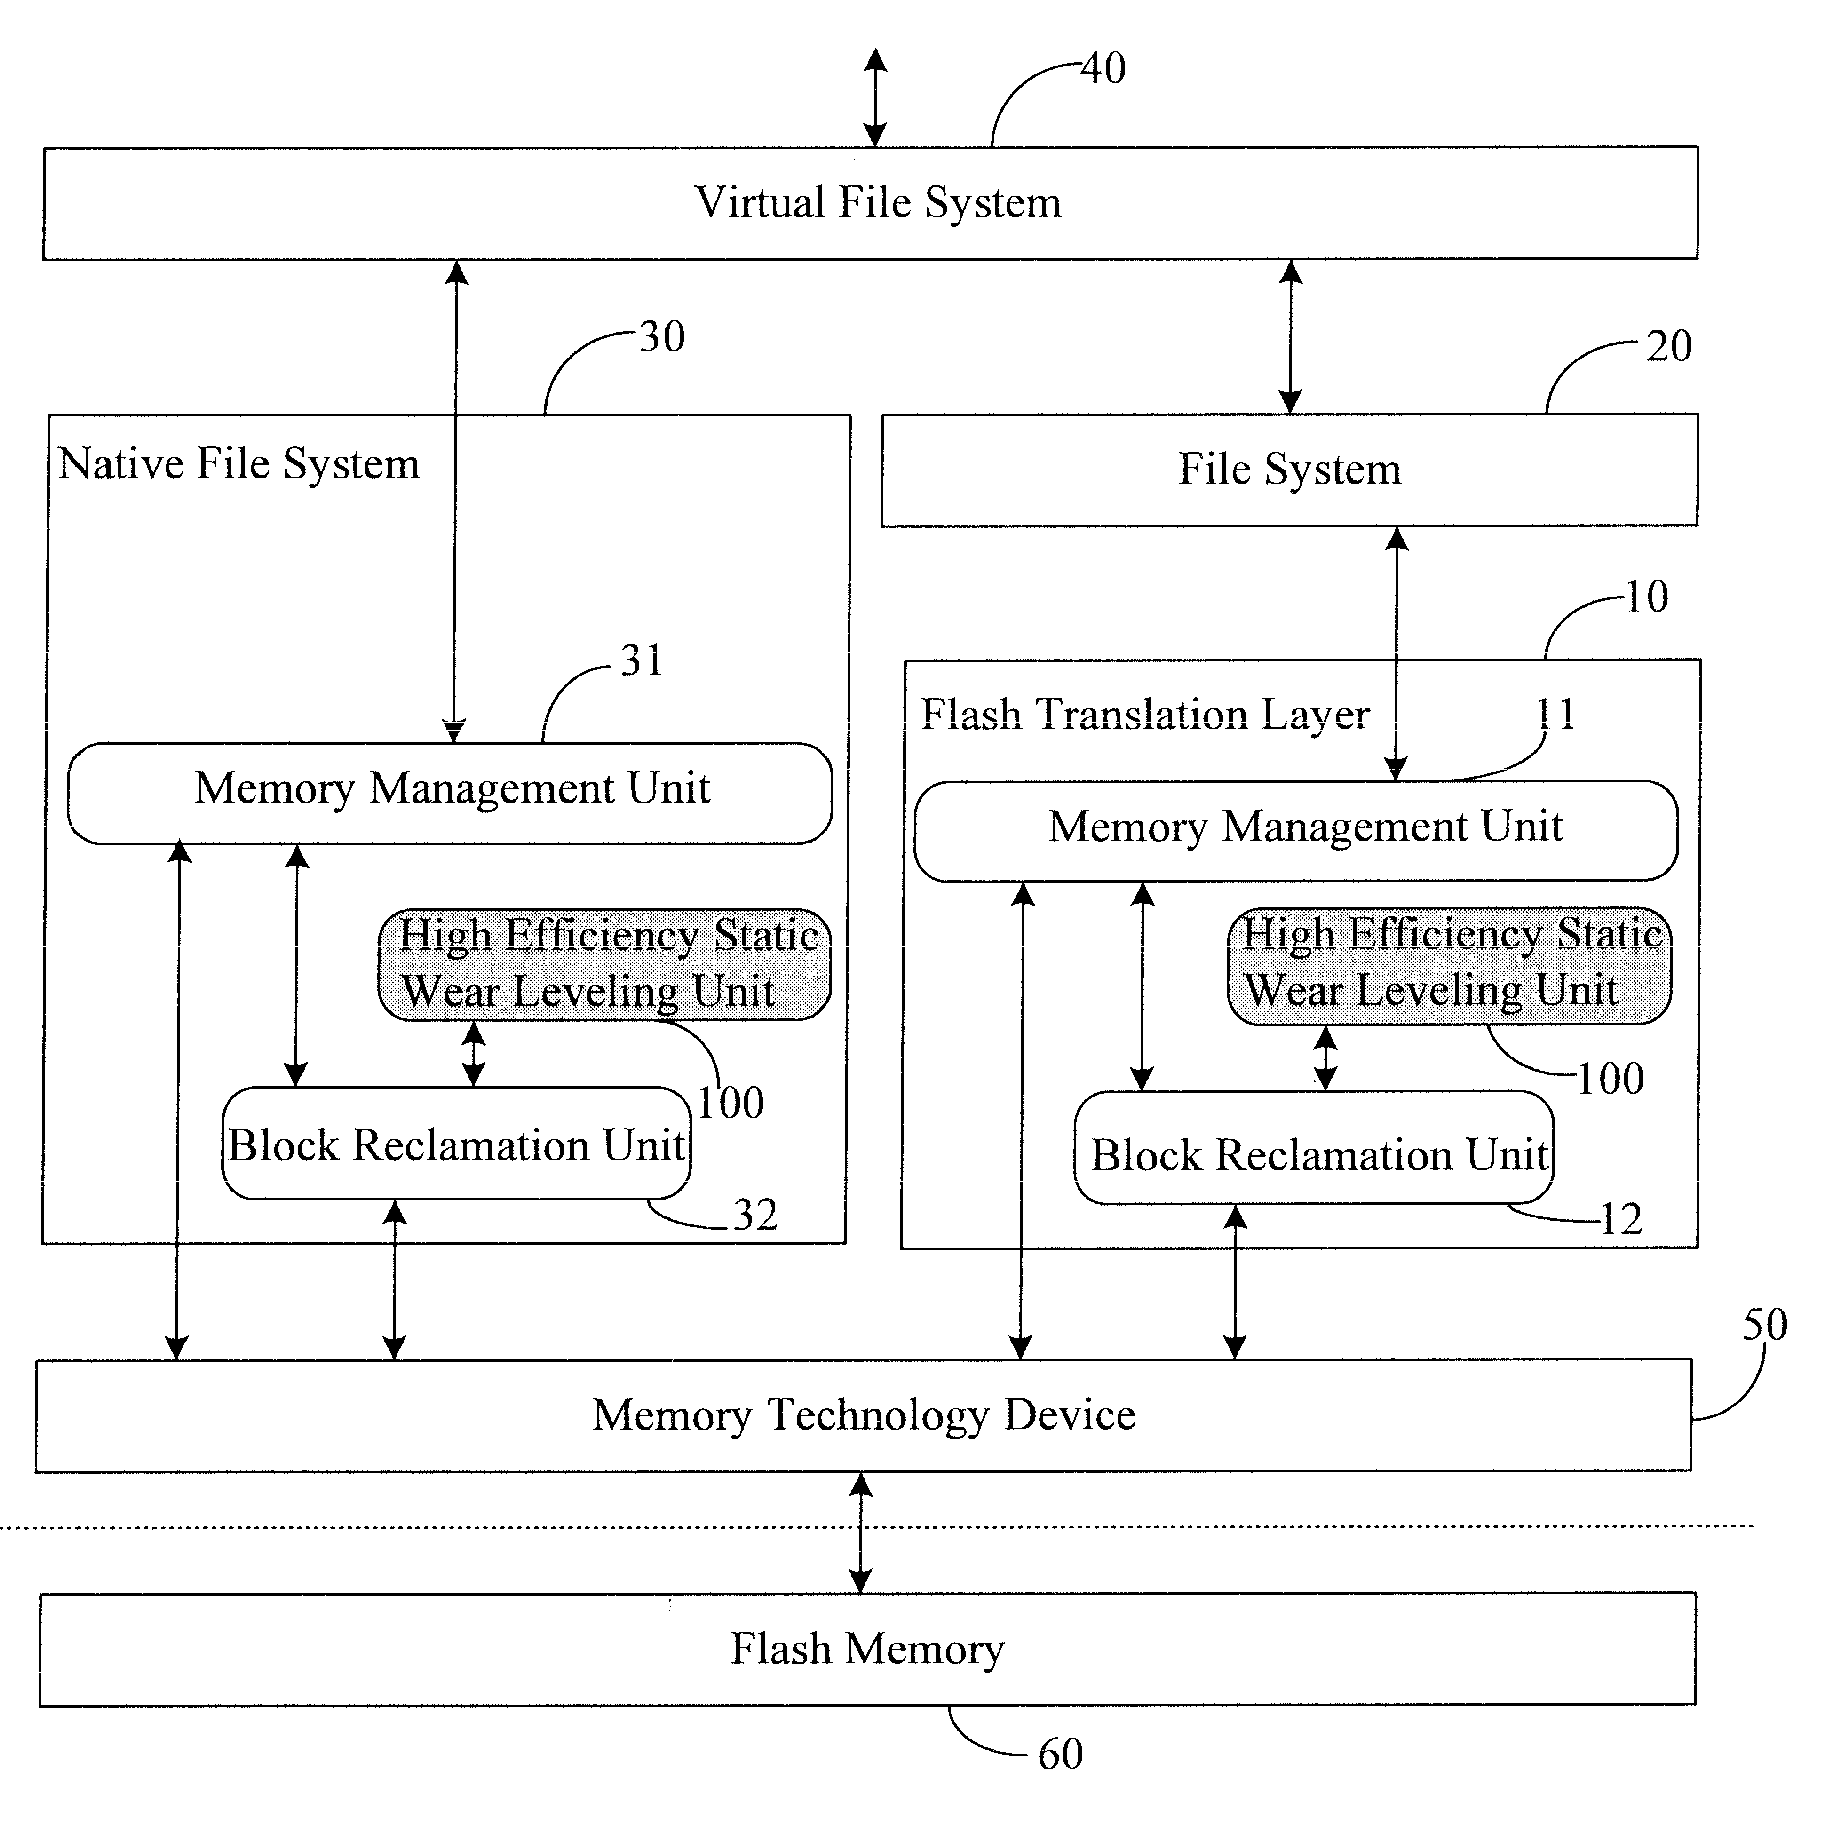 Method for performing static wear leveling on flash memory